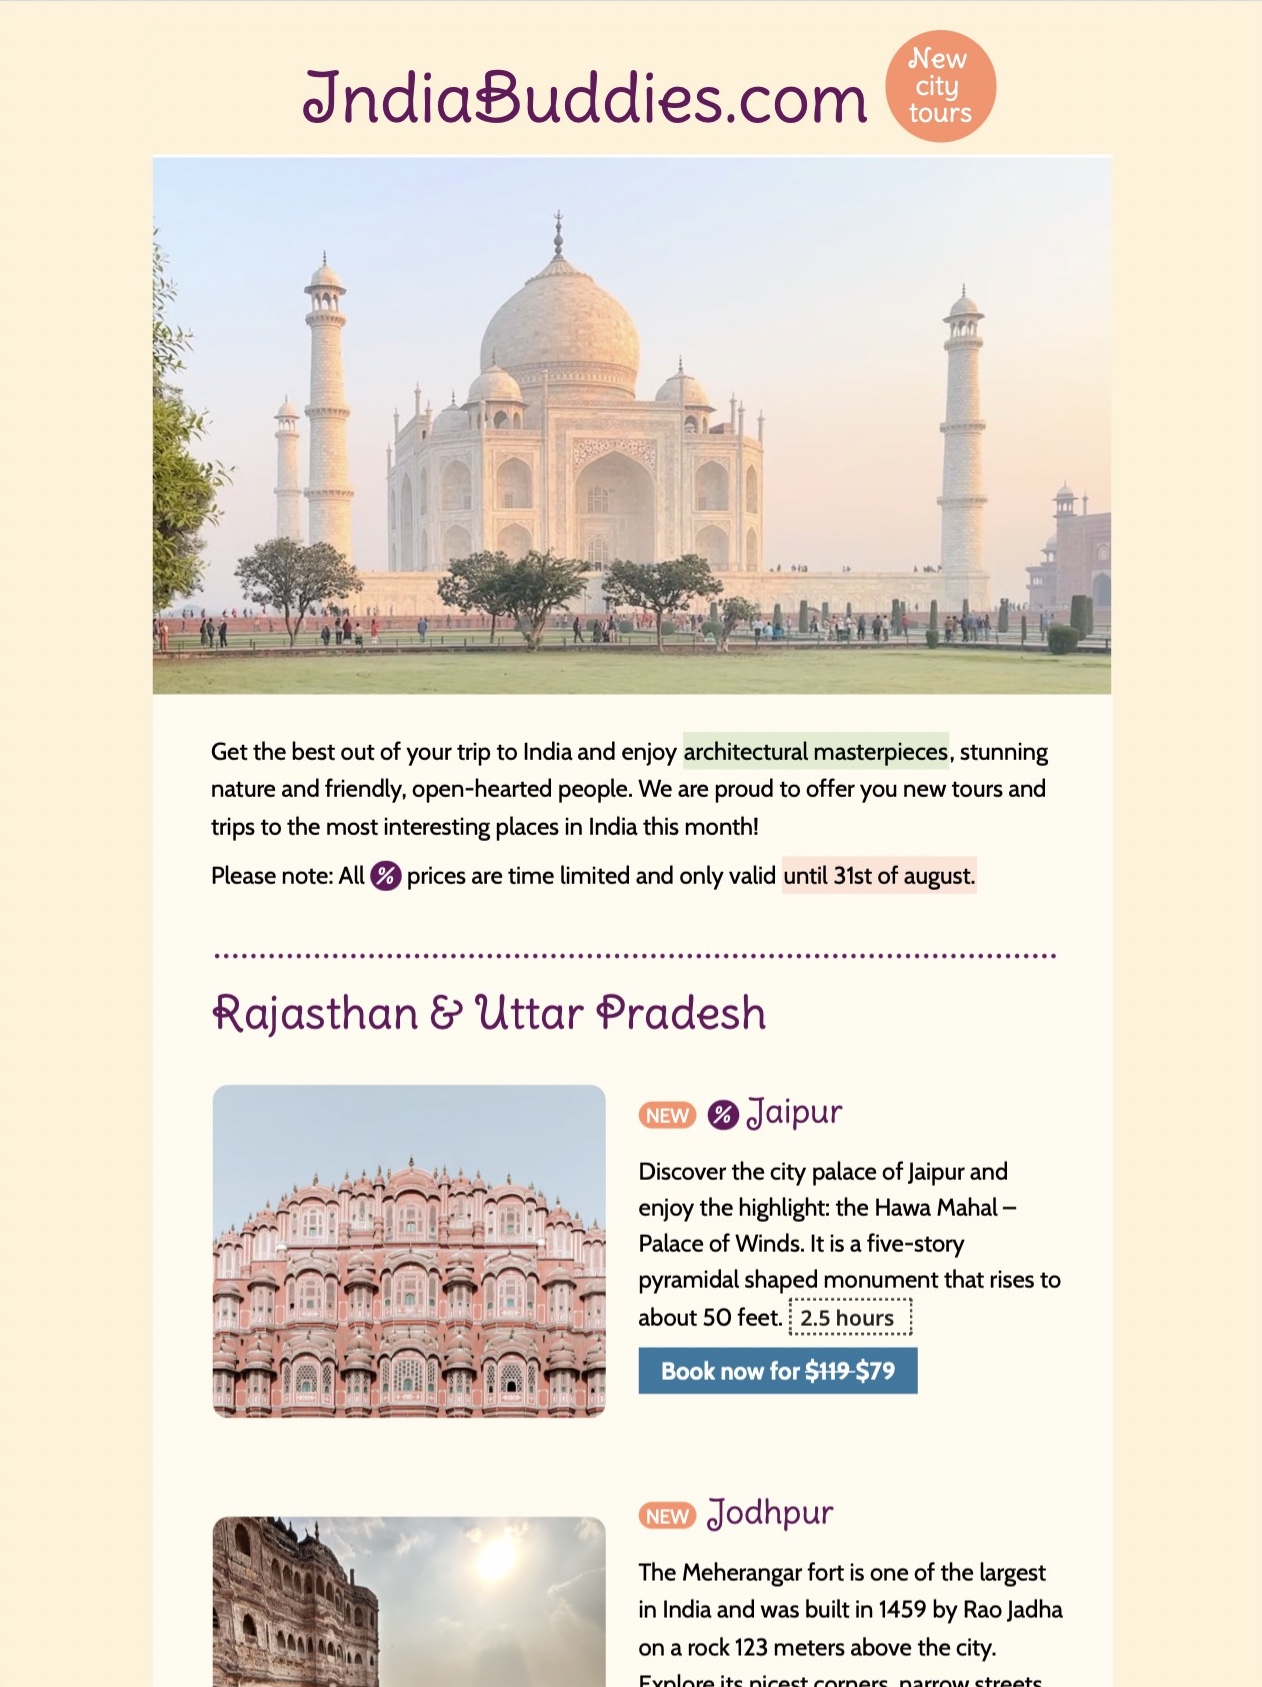 Travel and Tourism Email Template